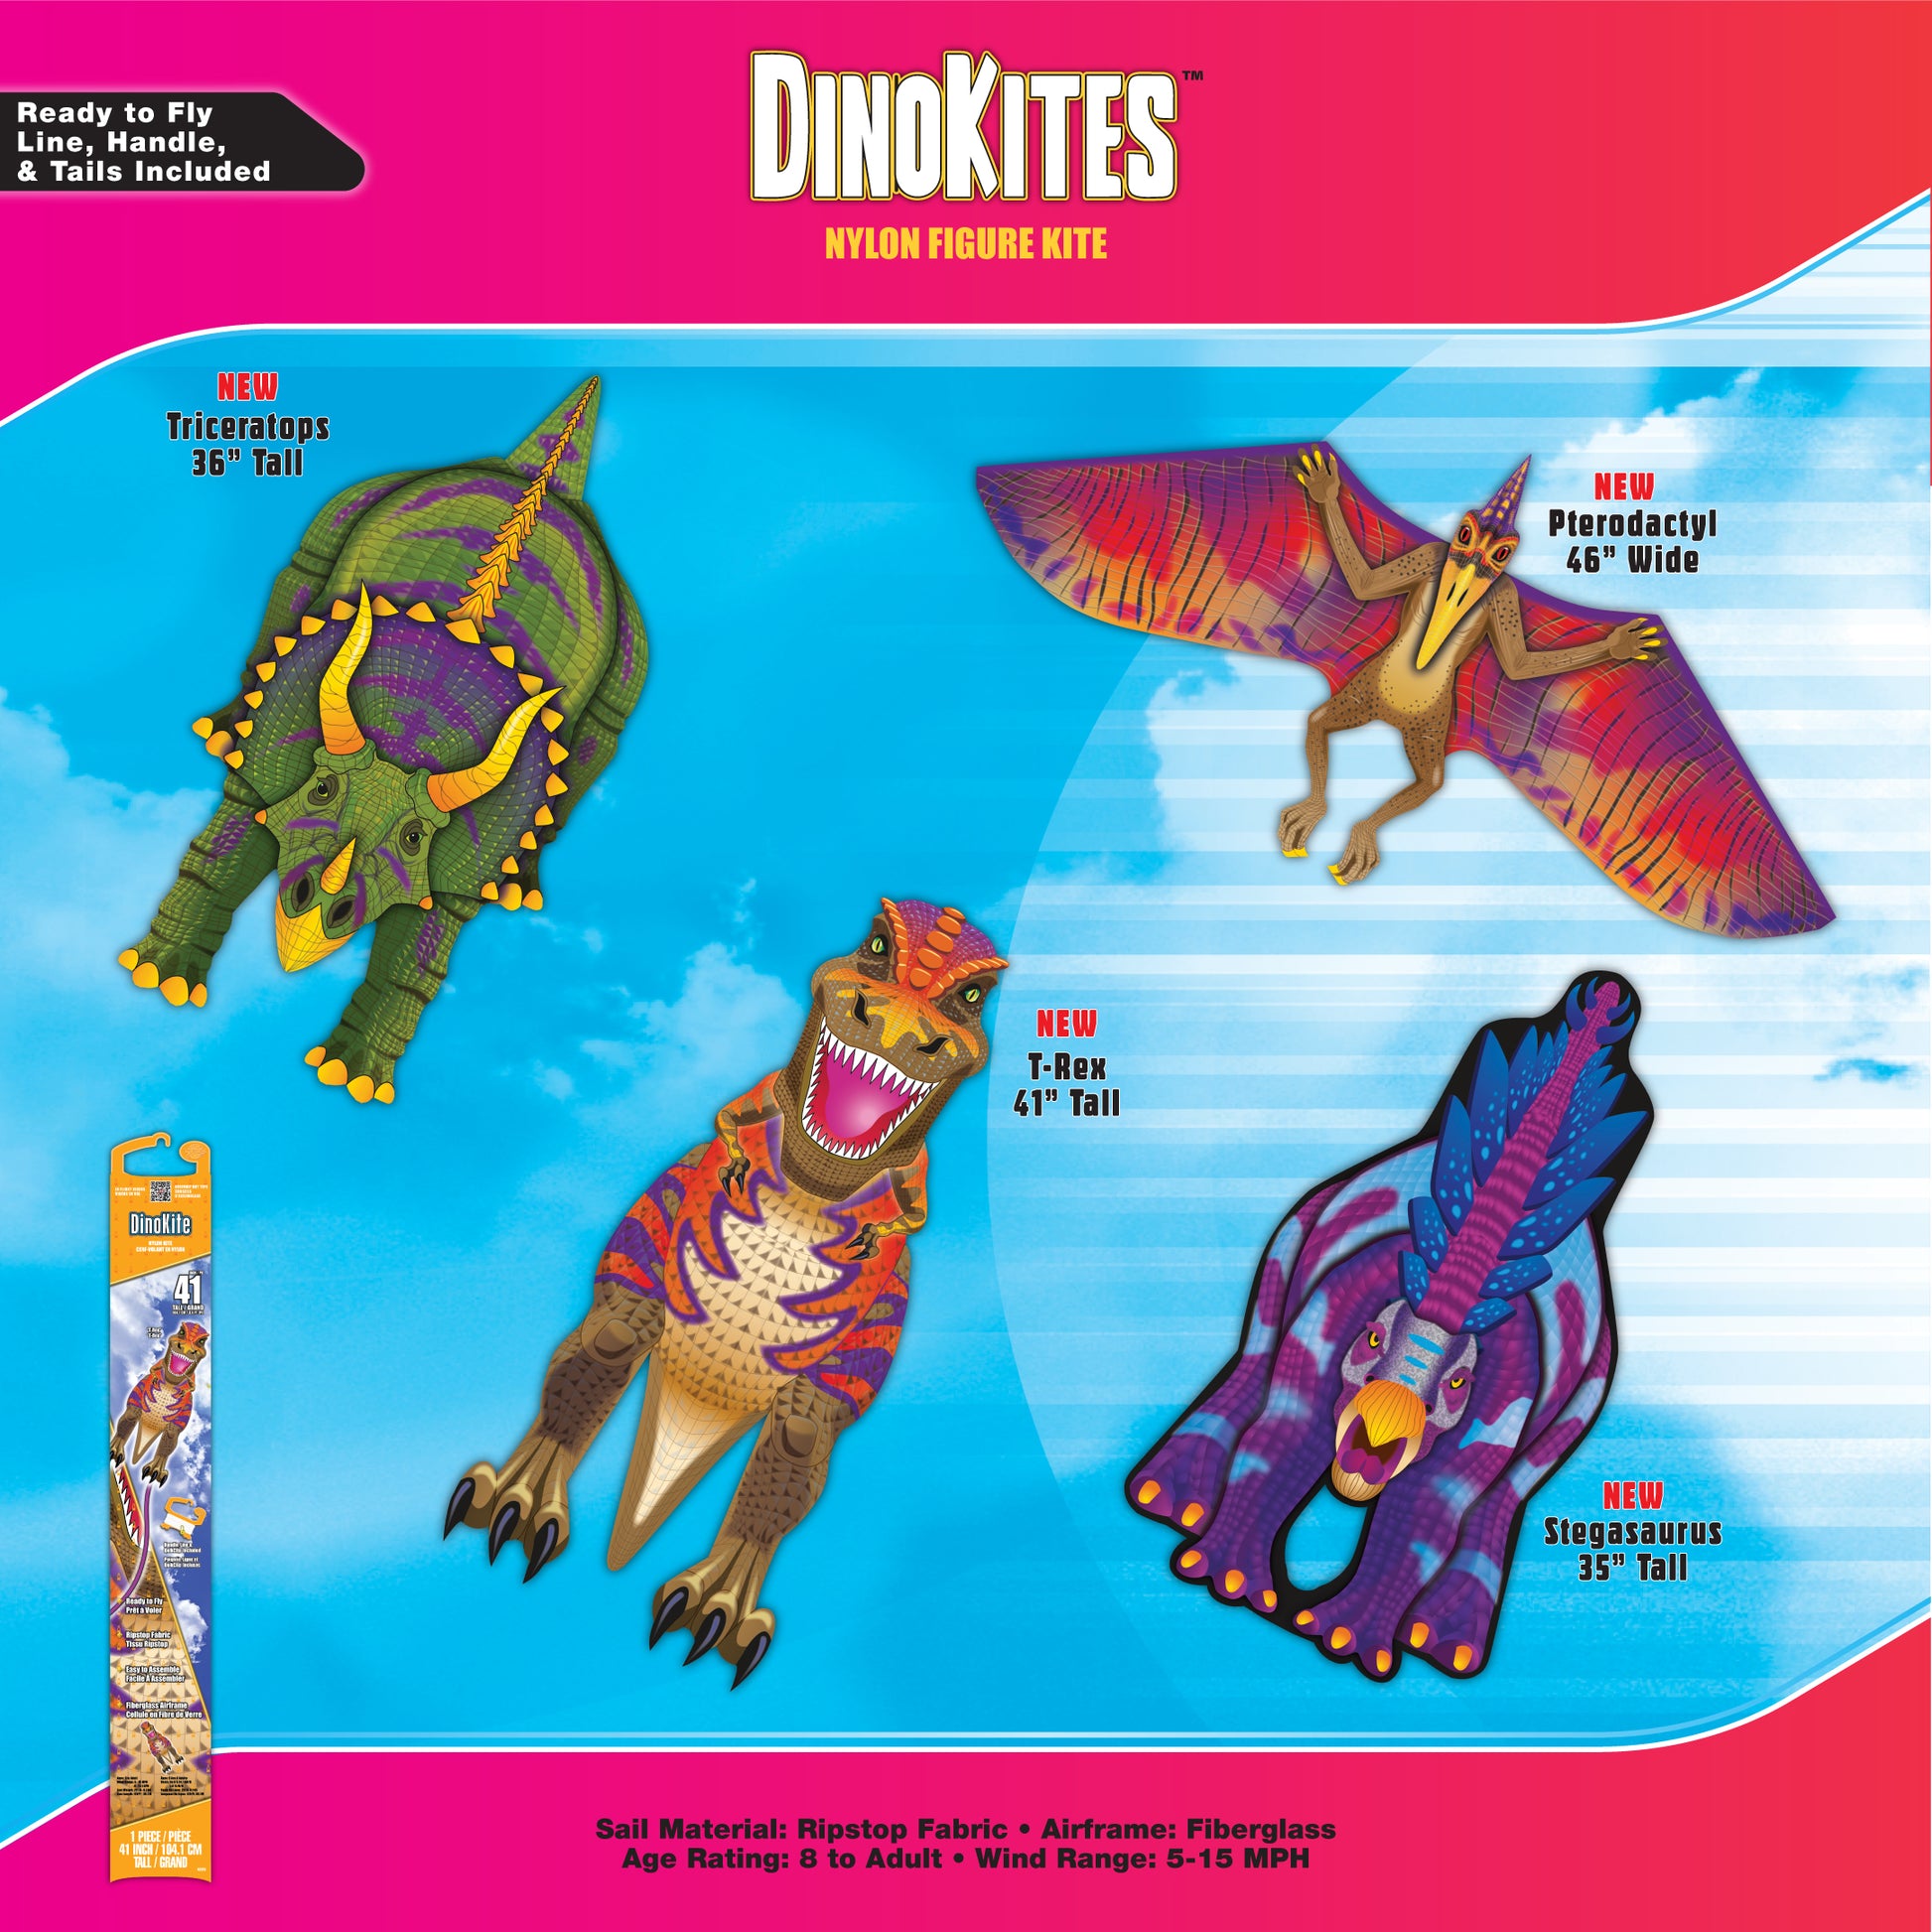 A graphic showing the full assortment of X Kites DinoKite with the Stegasaurus, Triceratops, Pteradactyl, and T-Rex kites pictured